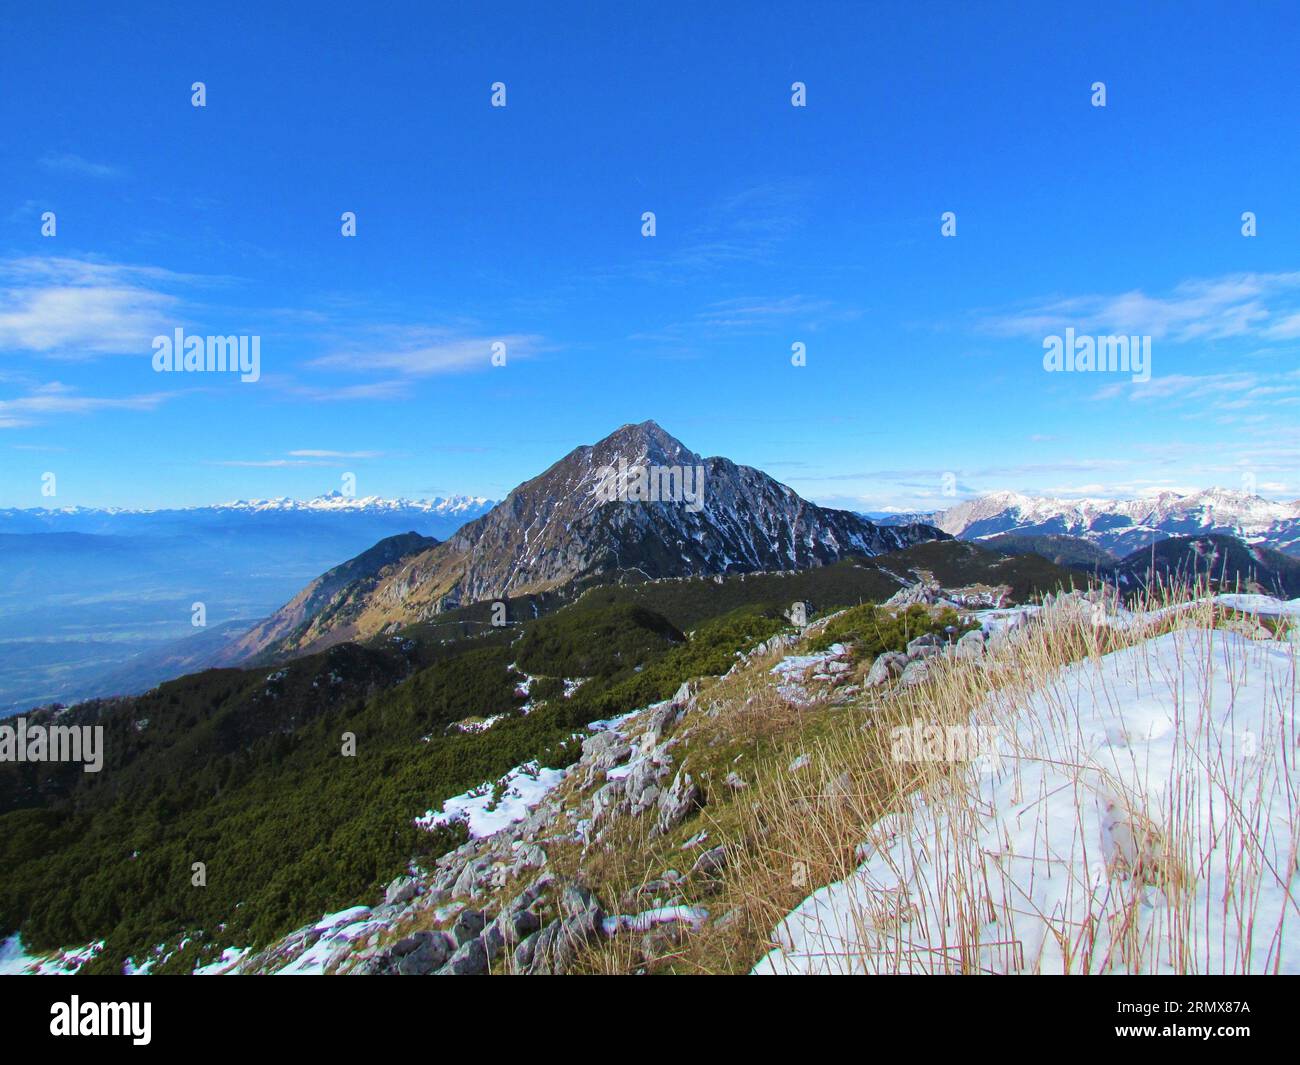 Scenic view of mountain Storzic in Kamnik-Savinja alps in Gorenjska region of Slovenia with creeping pine covered alpine landscape in front and the Ju Stock Photo